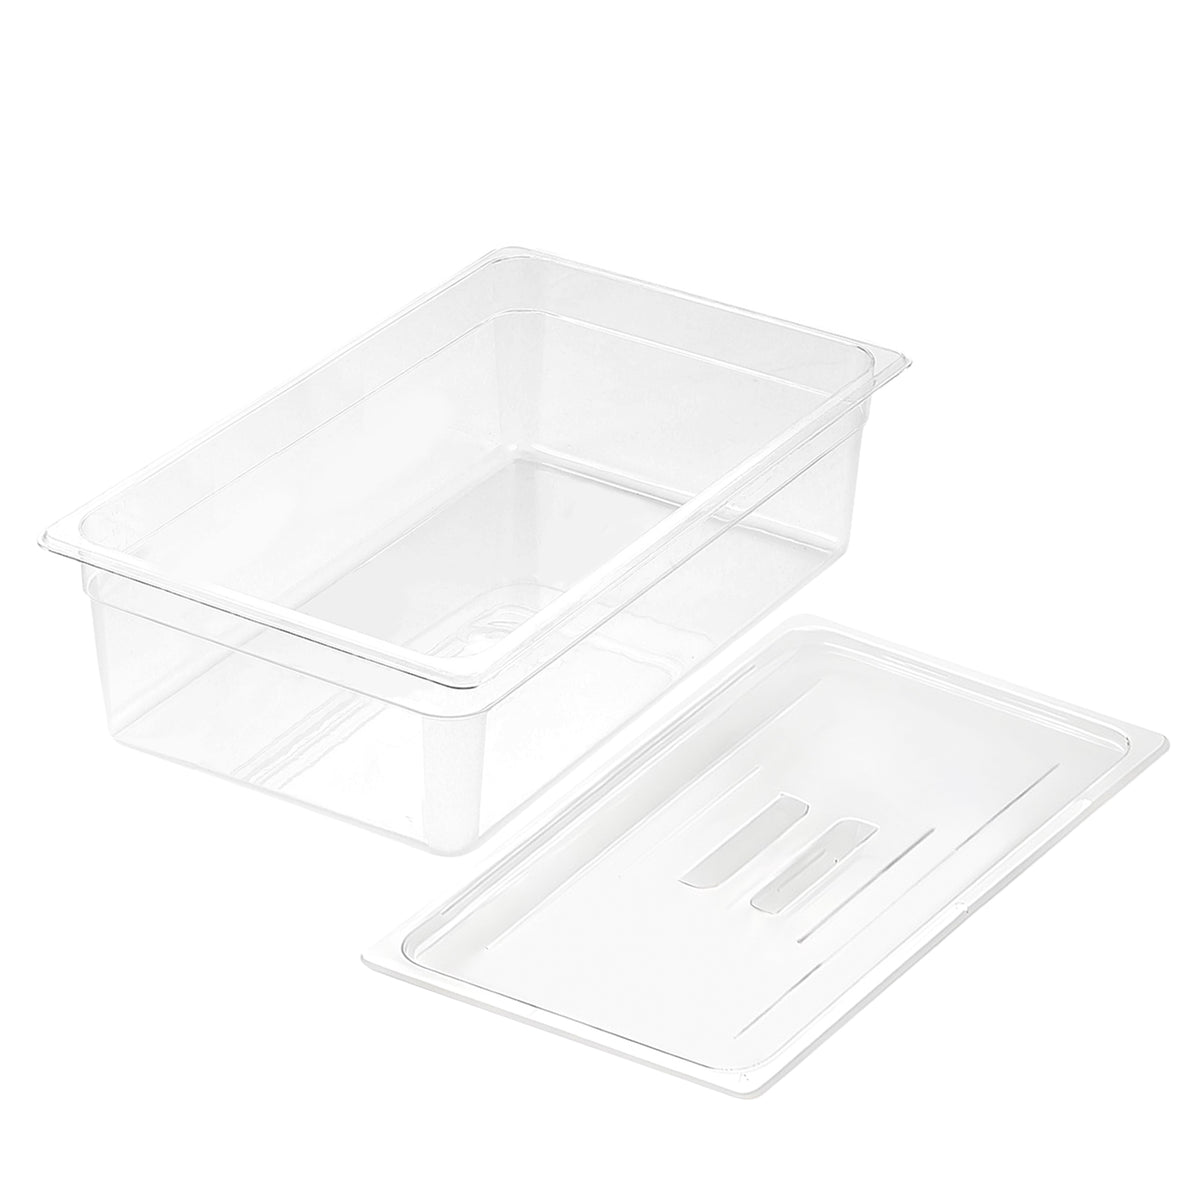 SOGA 150mm Clear Gastronorm GN Pan 1/1 Food Tray Storage with Lid